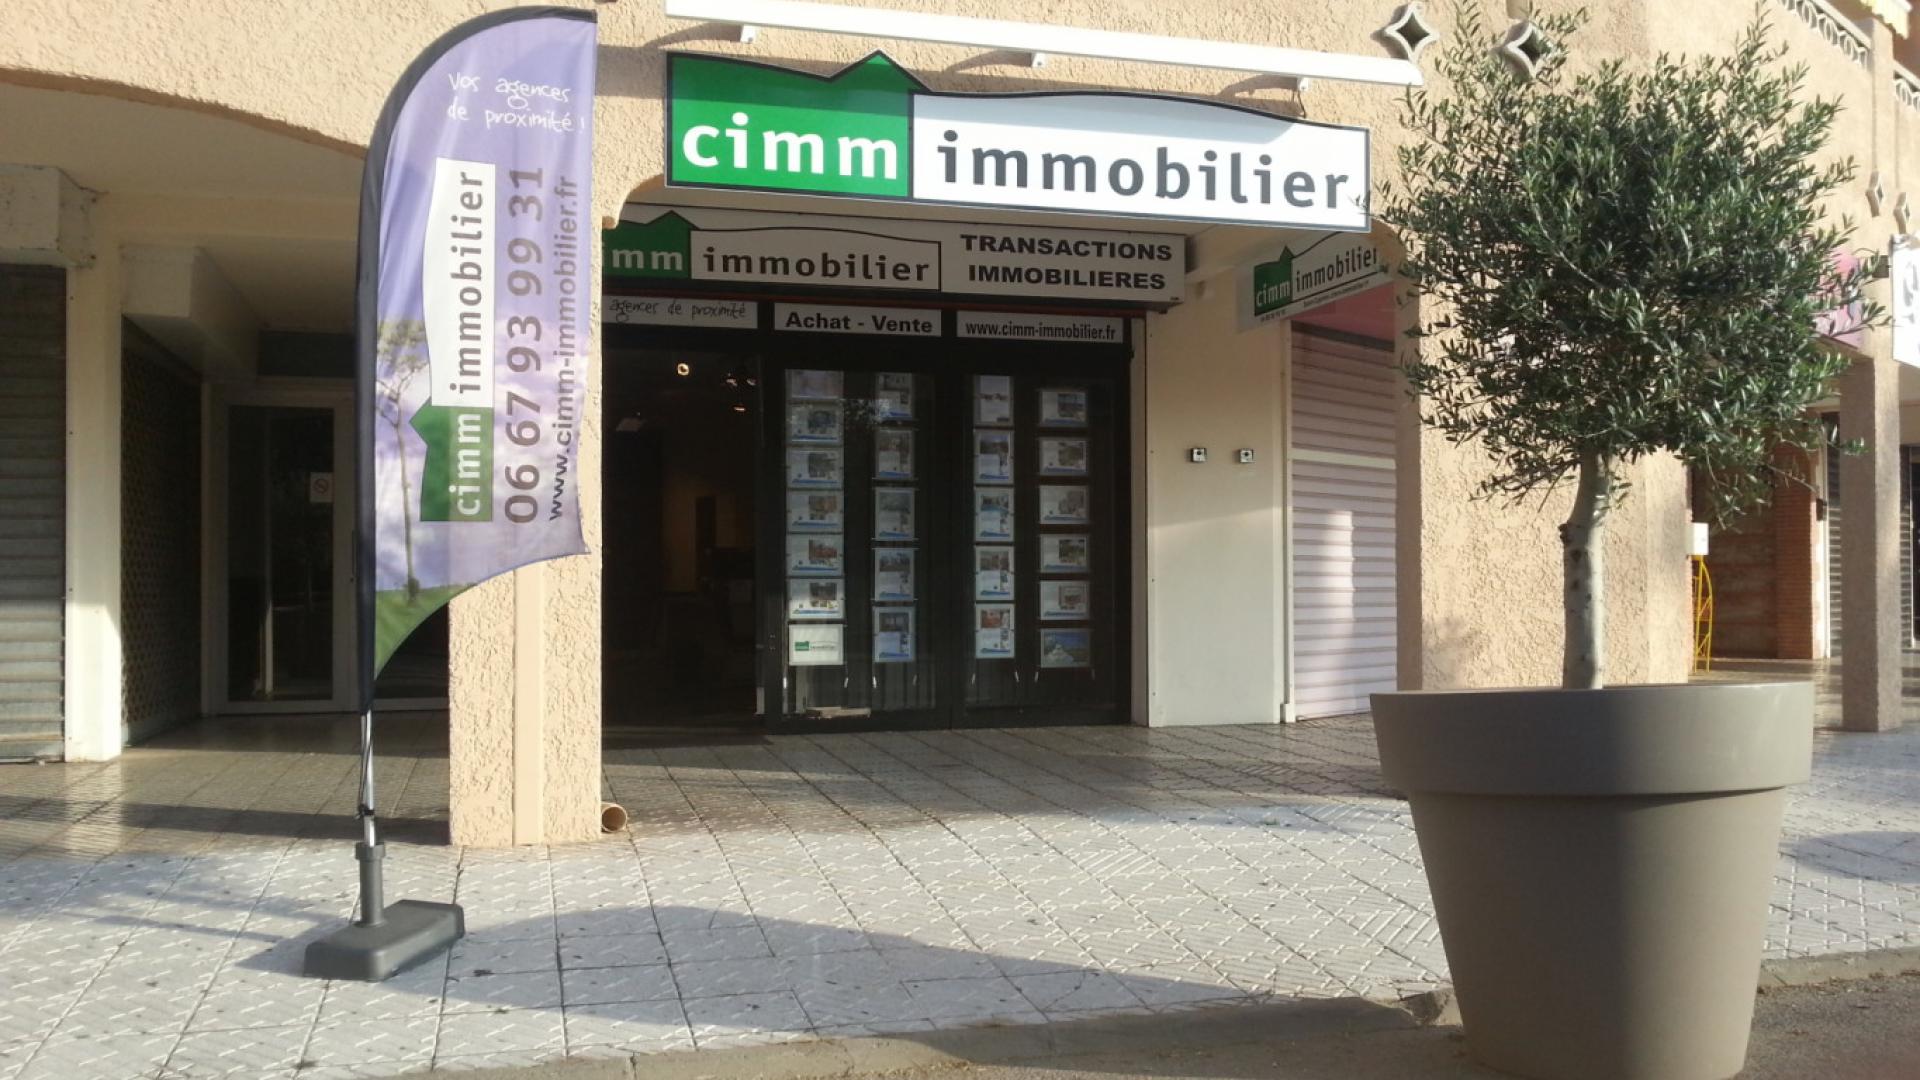 CIMM IMMOBILIER